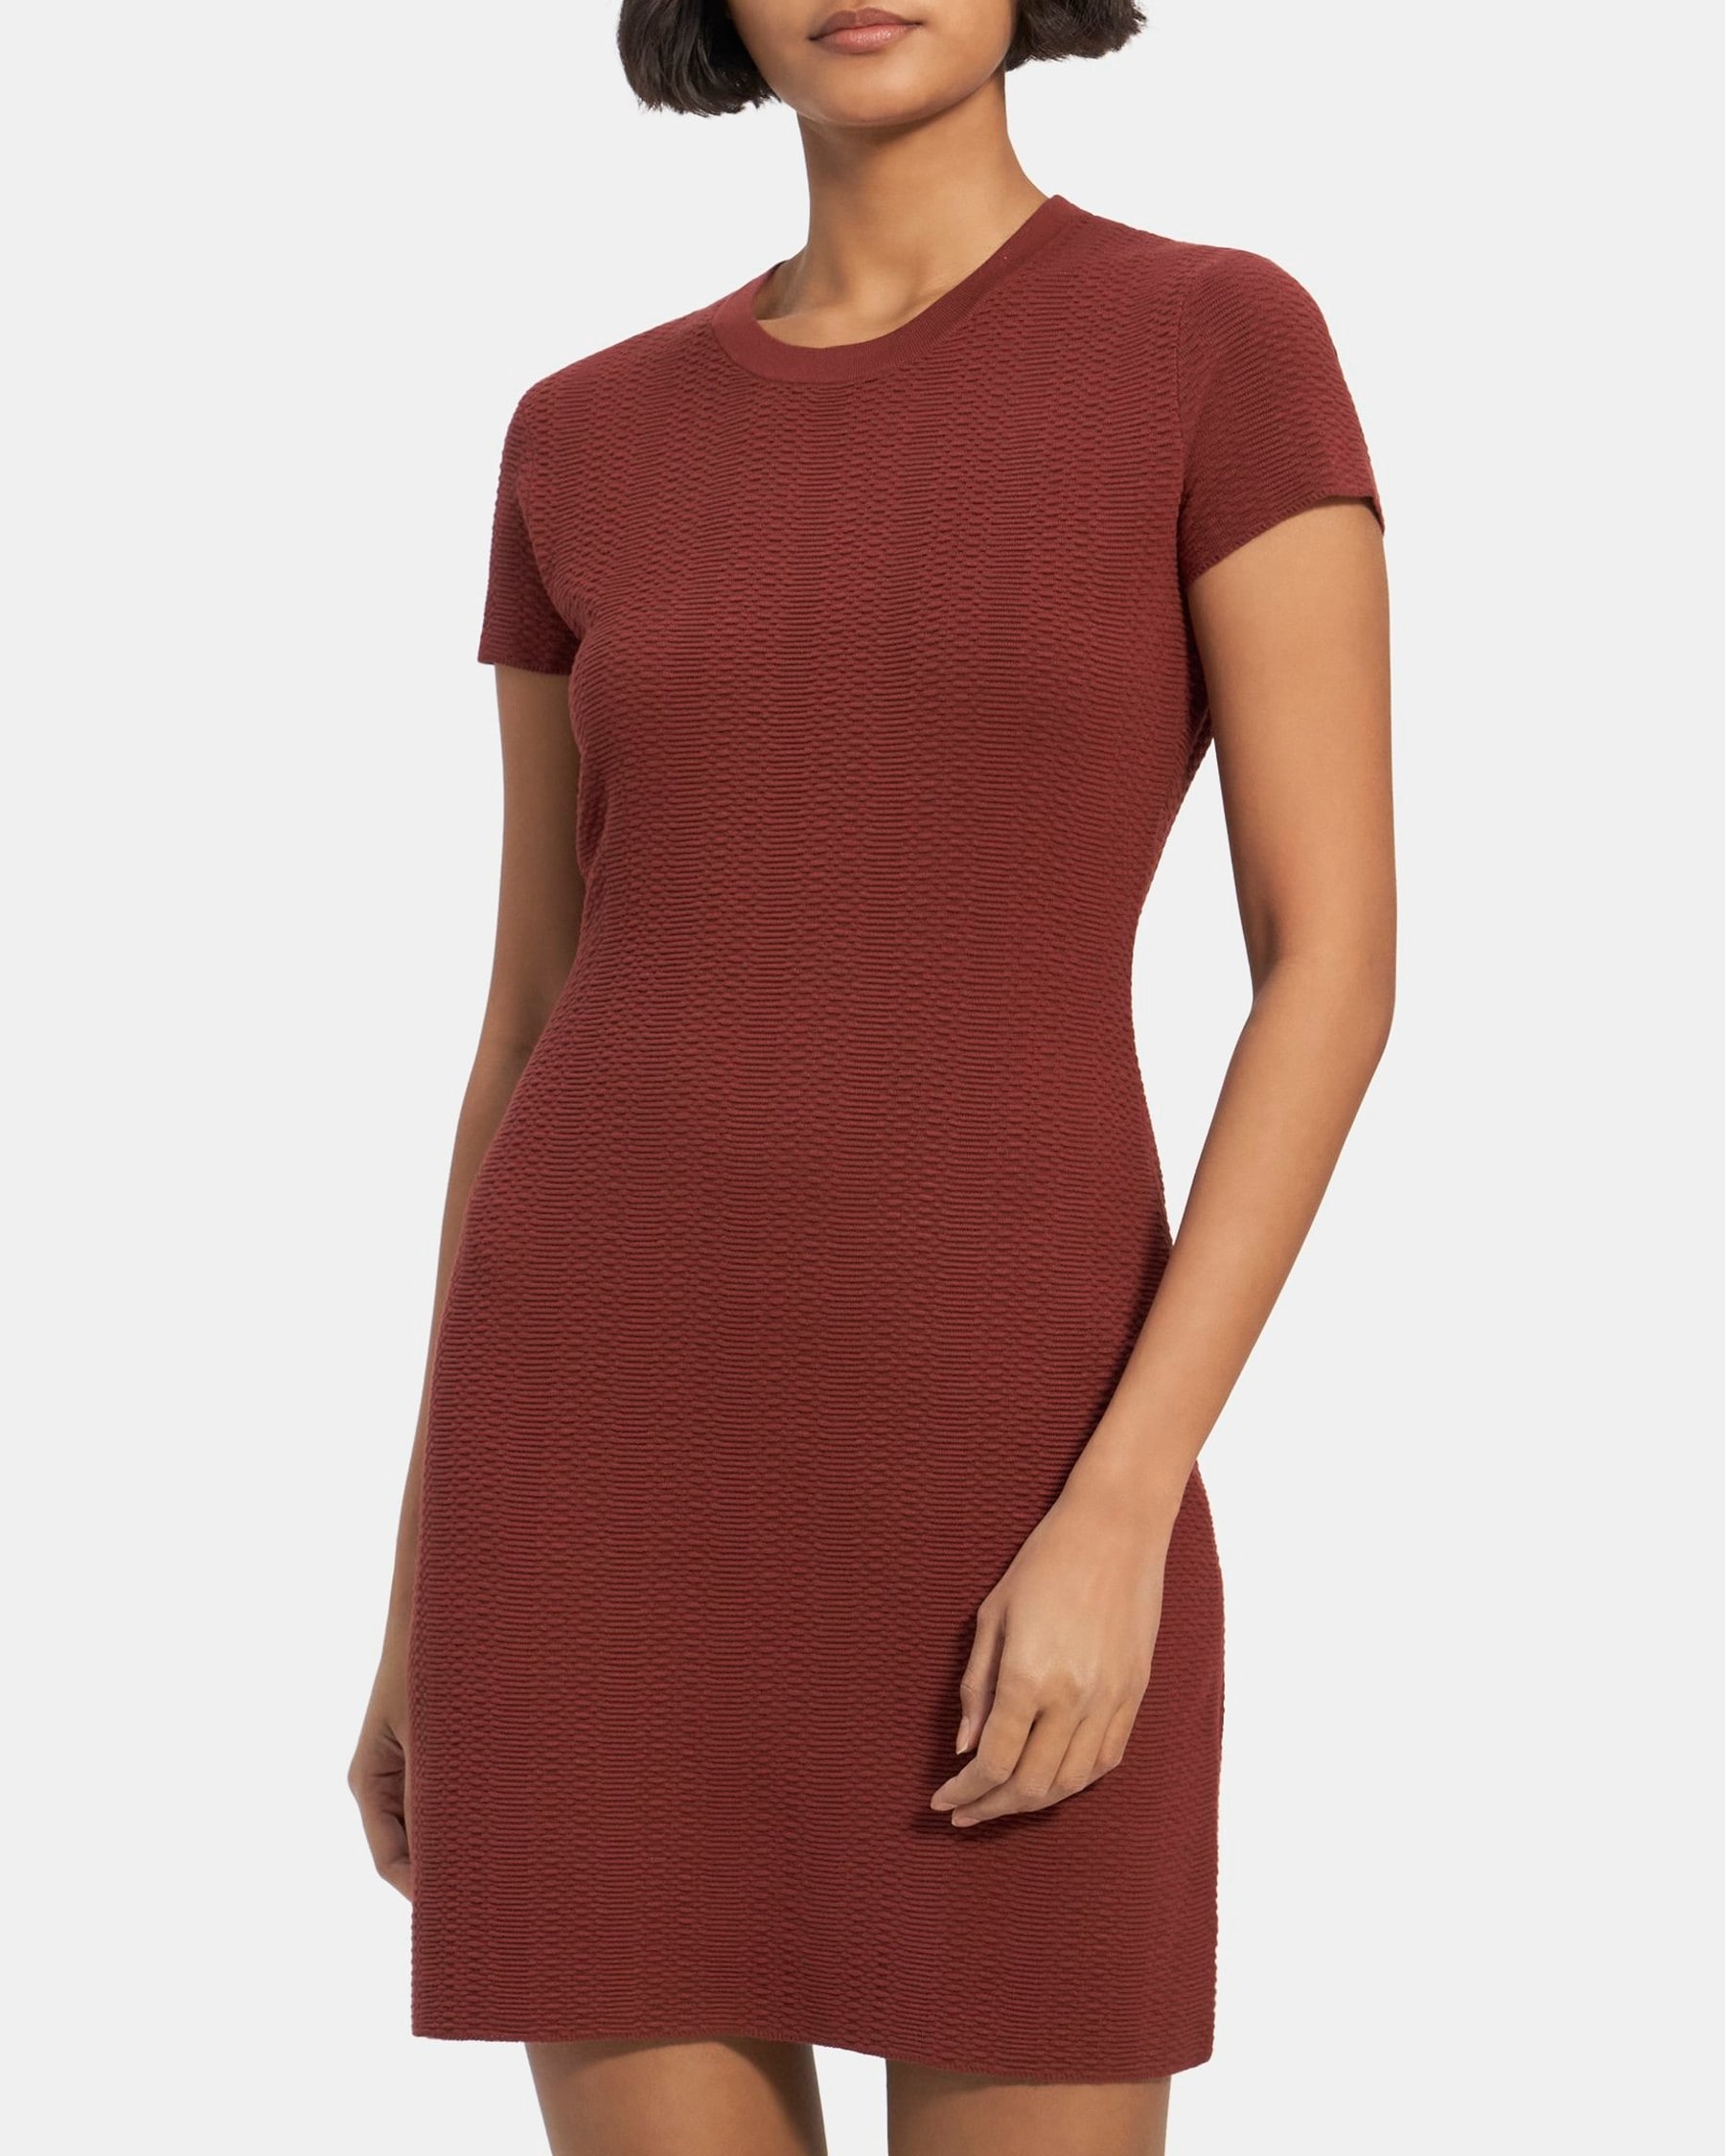 Theory Flare Dress in Stretch Viscose Knit